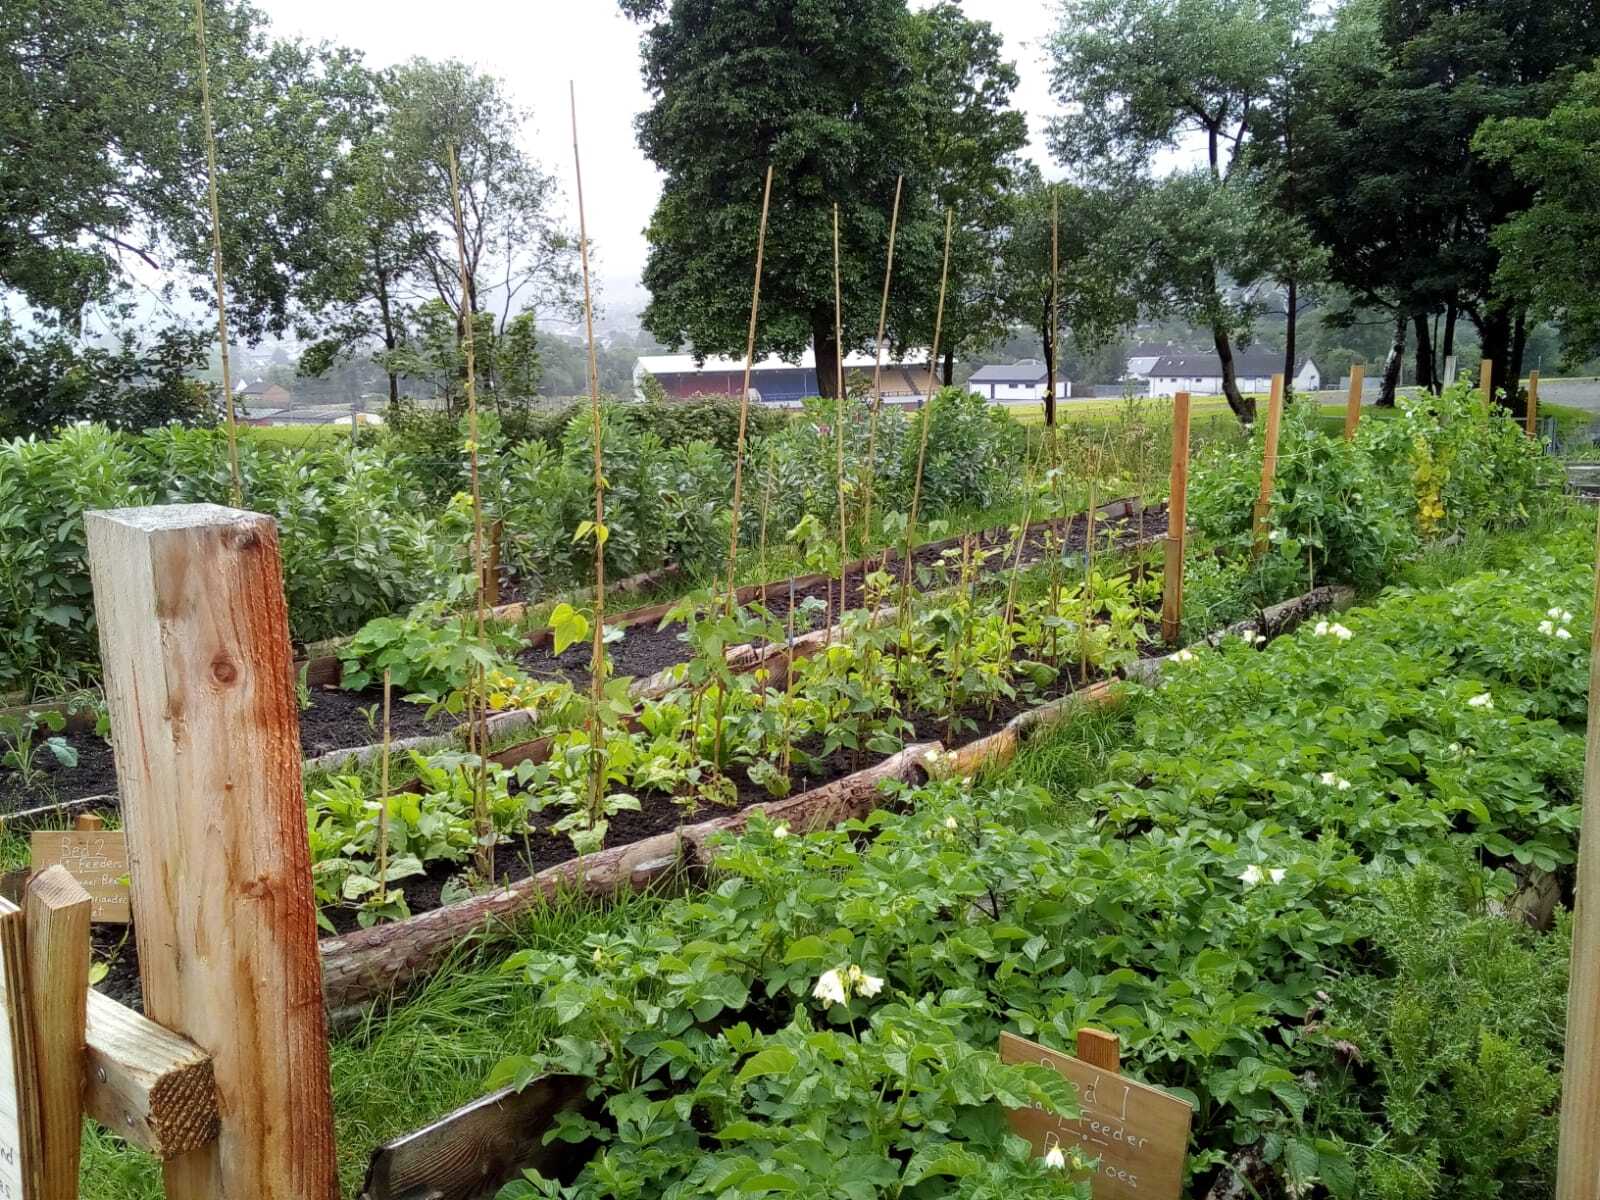 Beans and potatoes in the raised beds during the first summer of the project